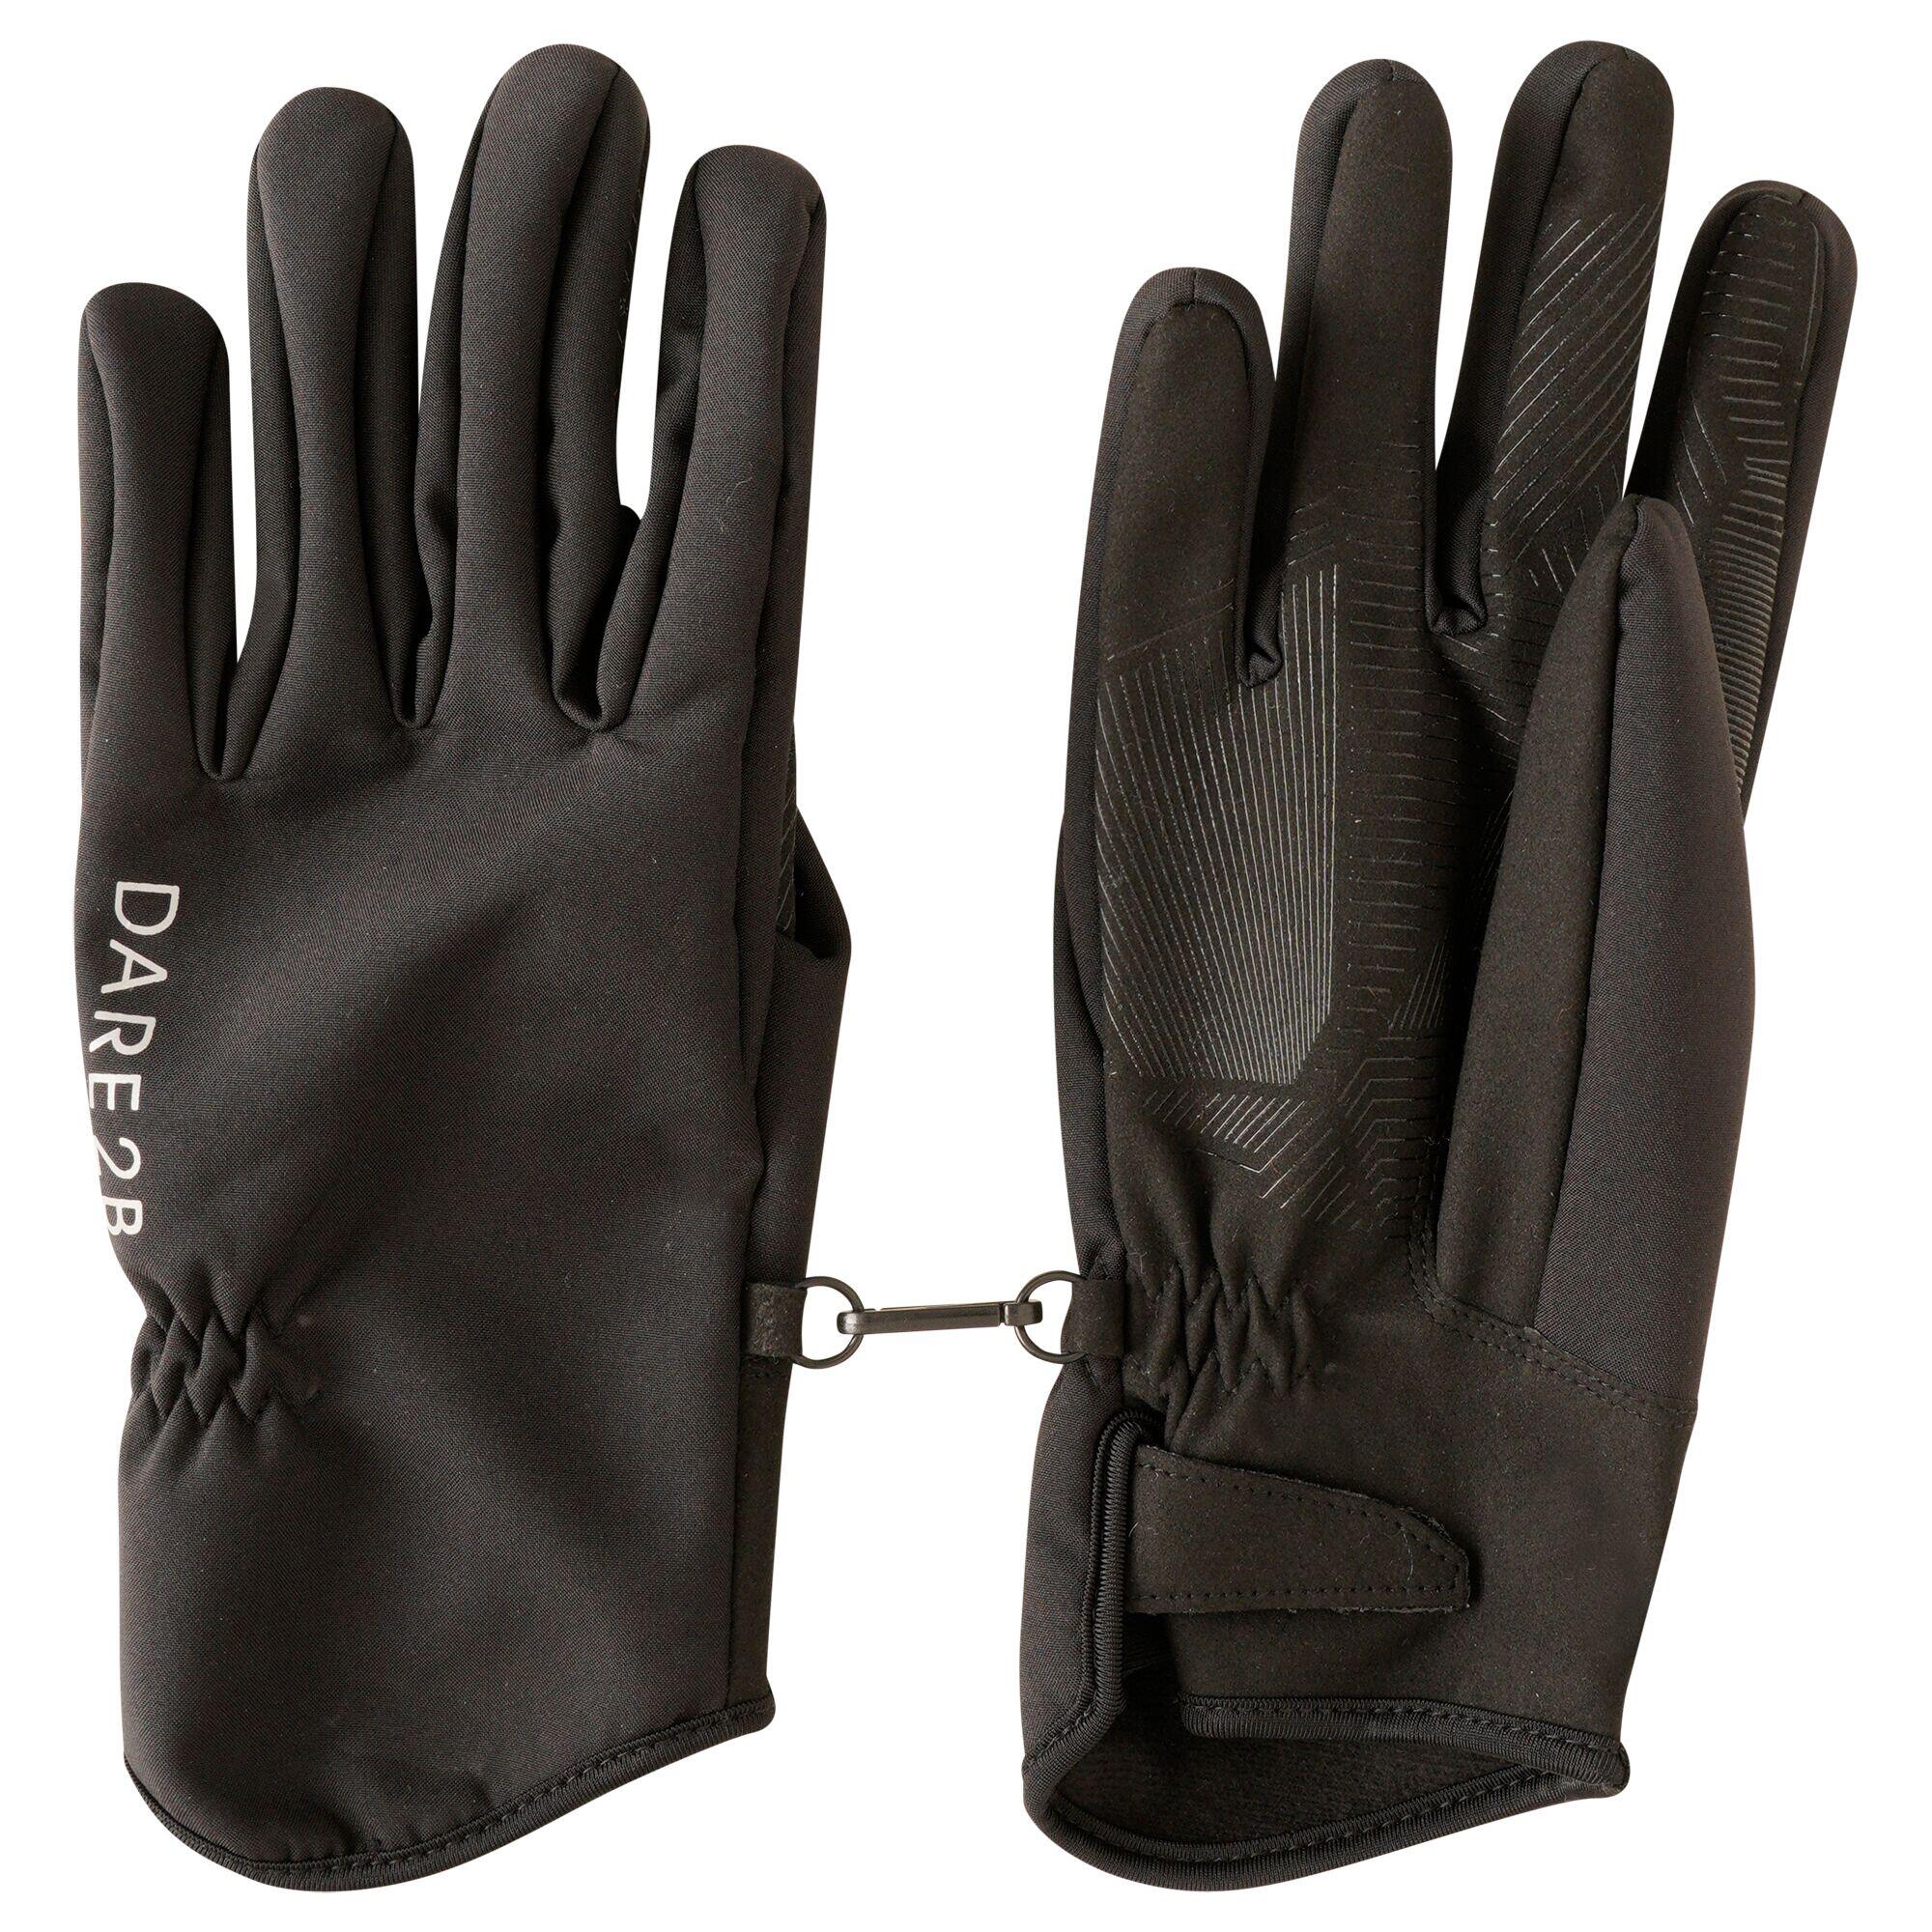 DARE 2B Pertent Adults' Cycling Gloves